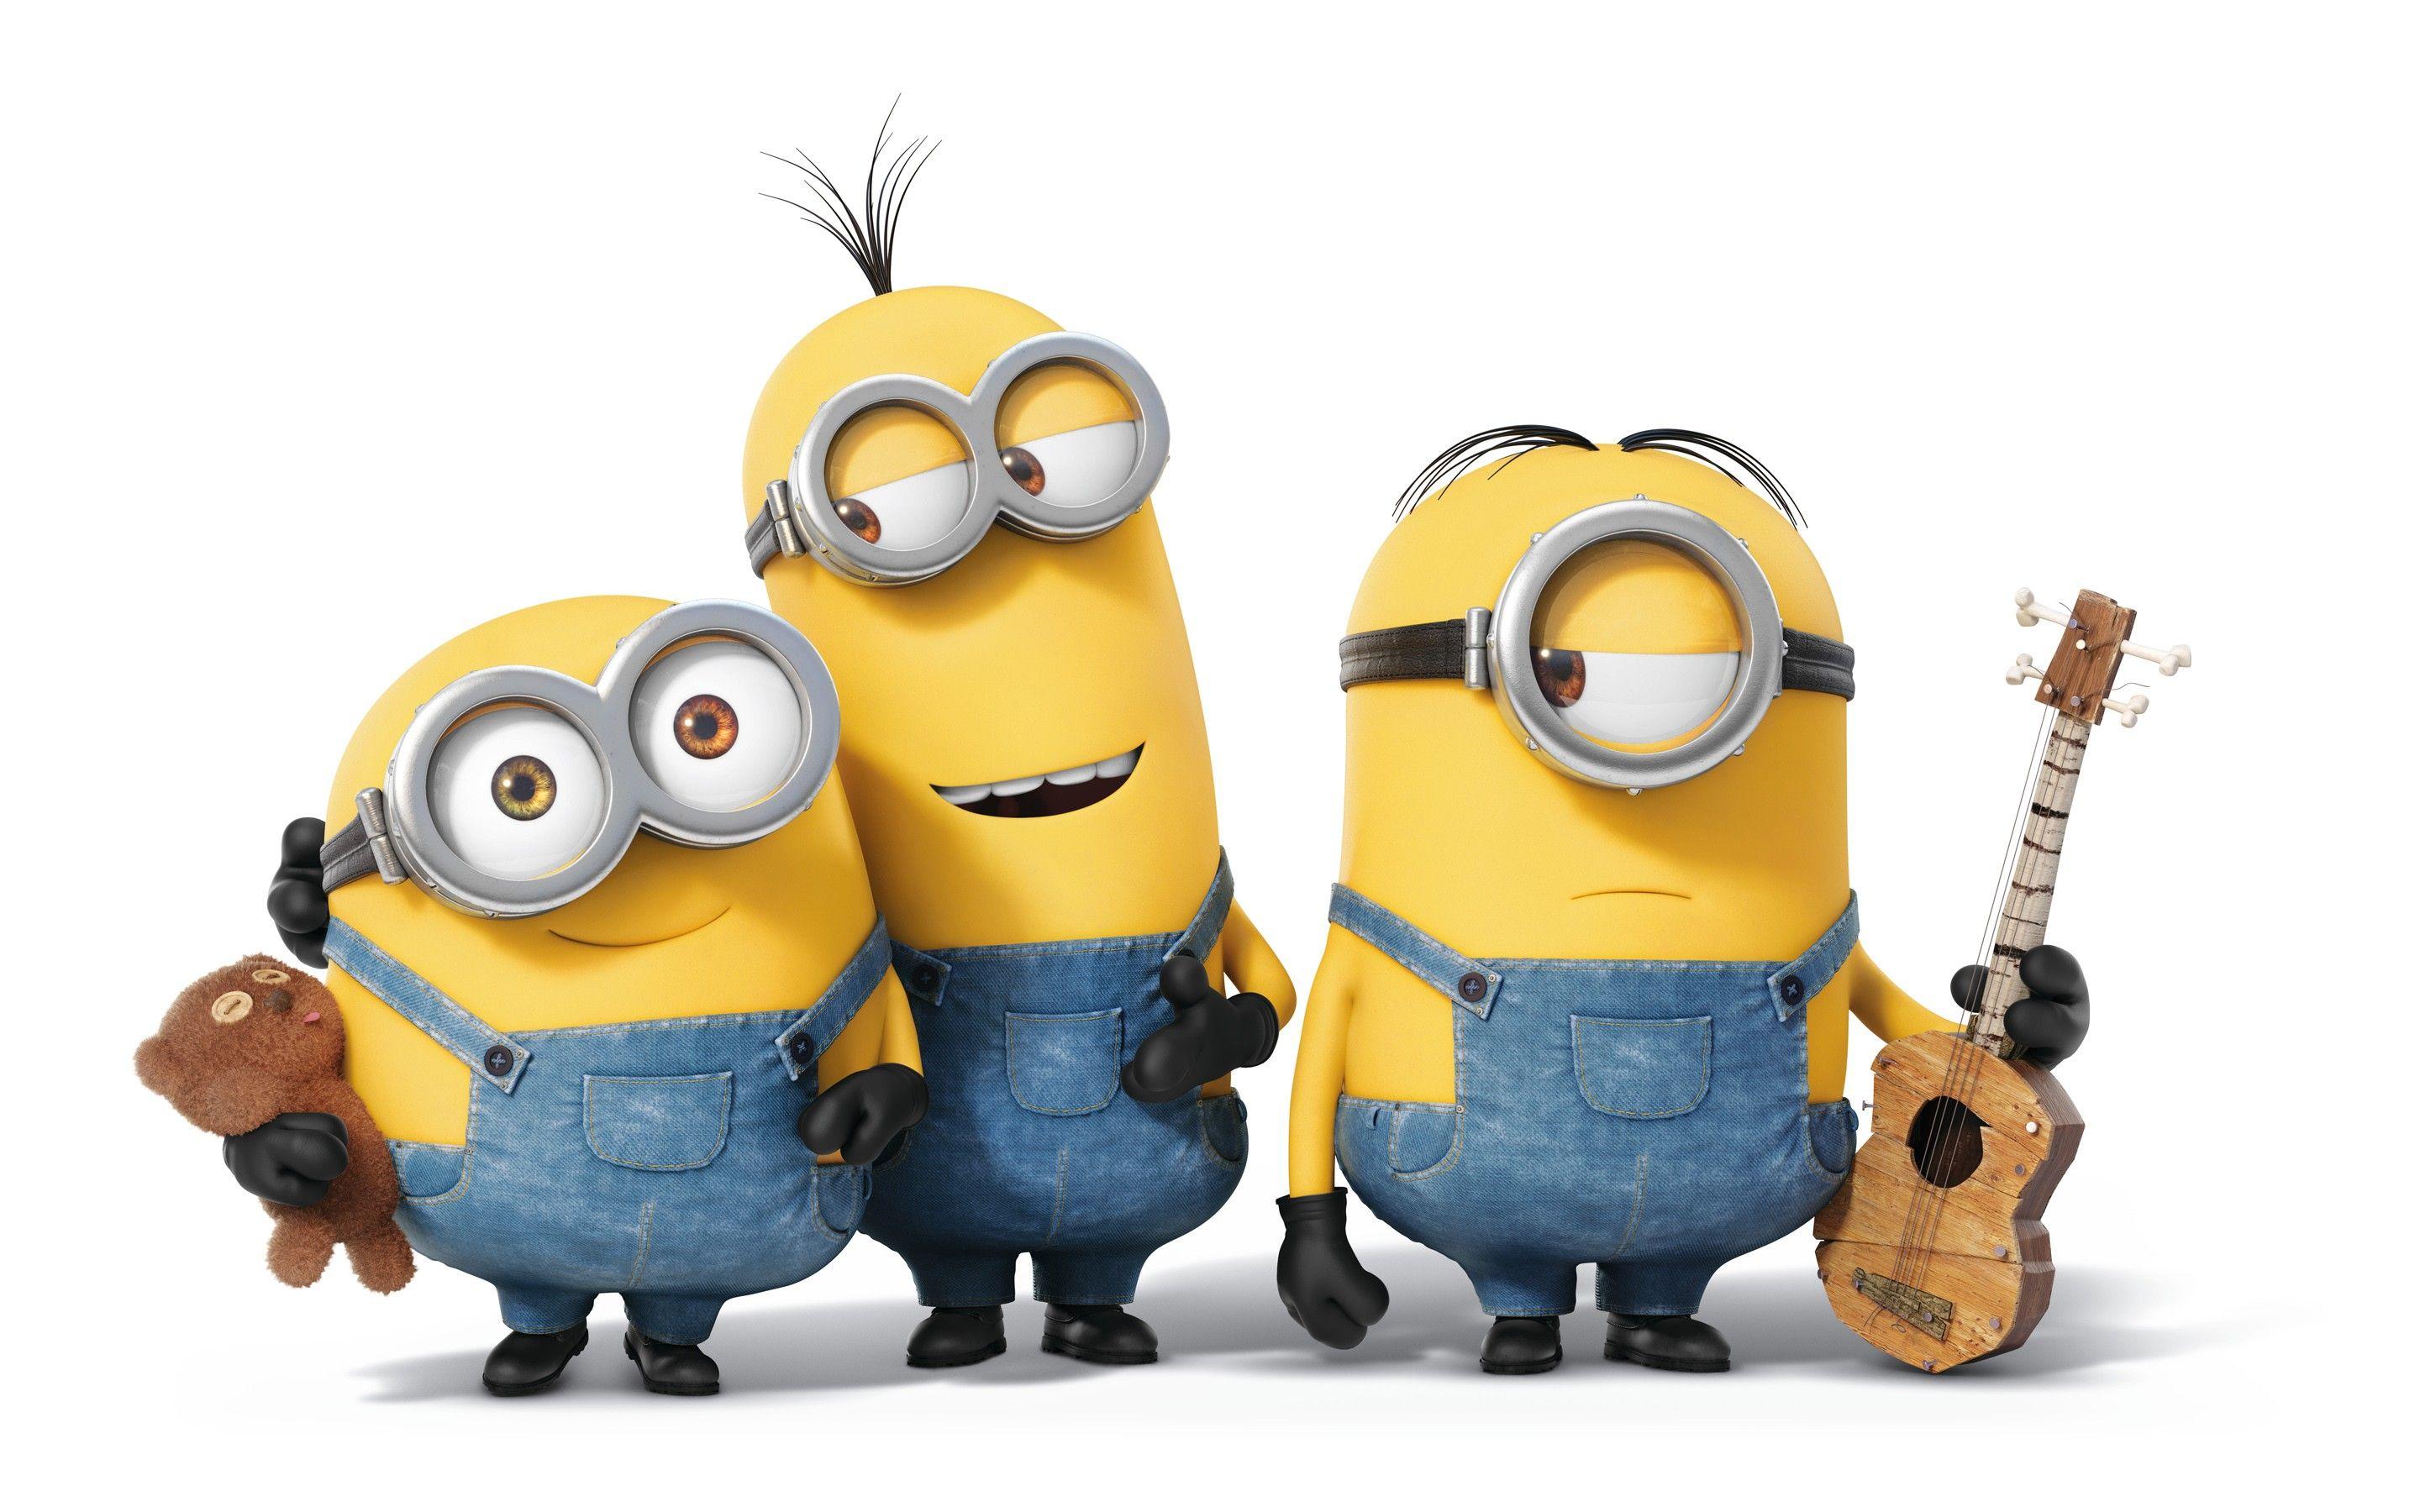 Beautiful HD Wallpaper for iPhone 6 Minions